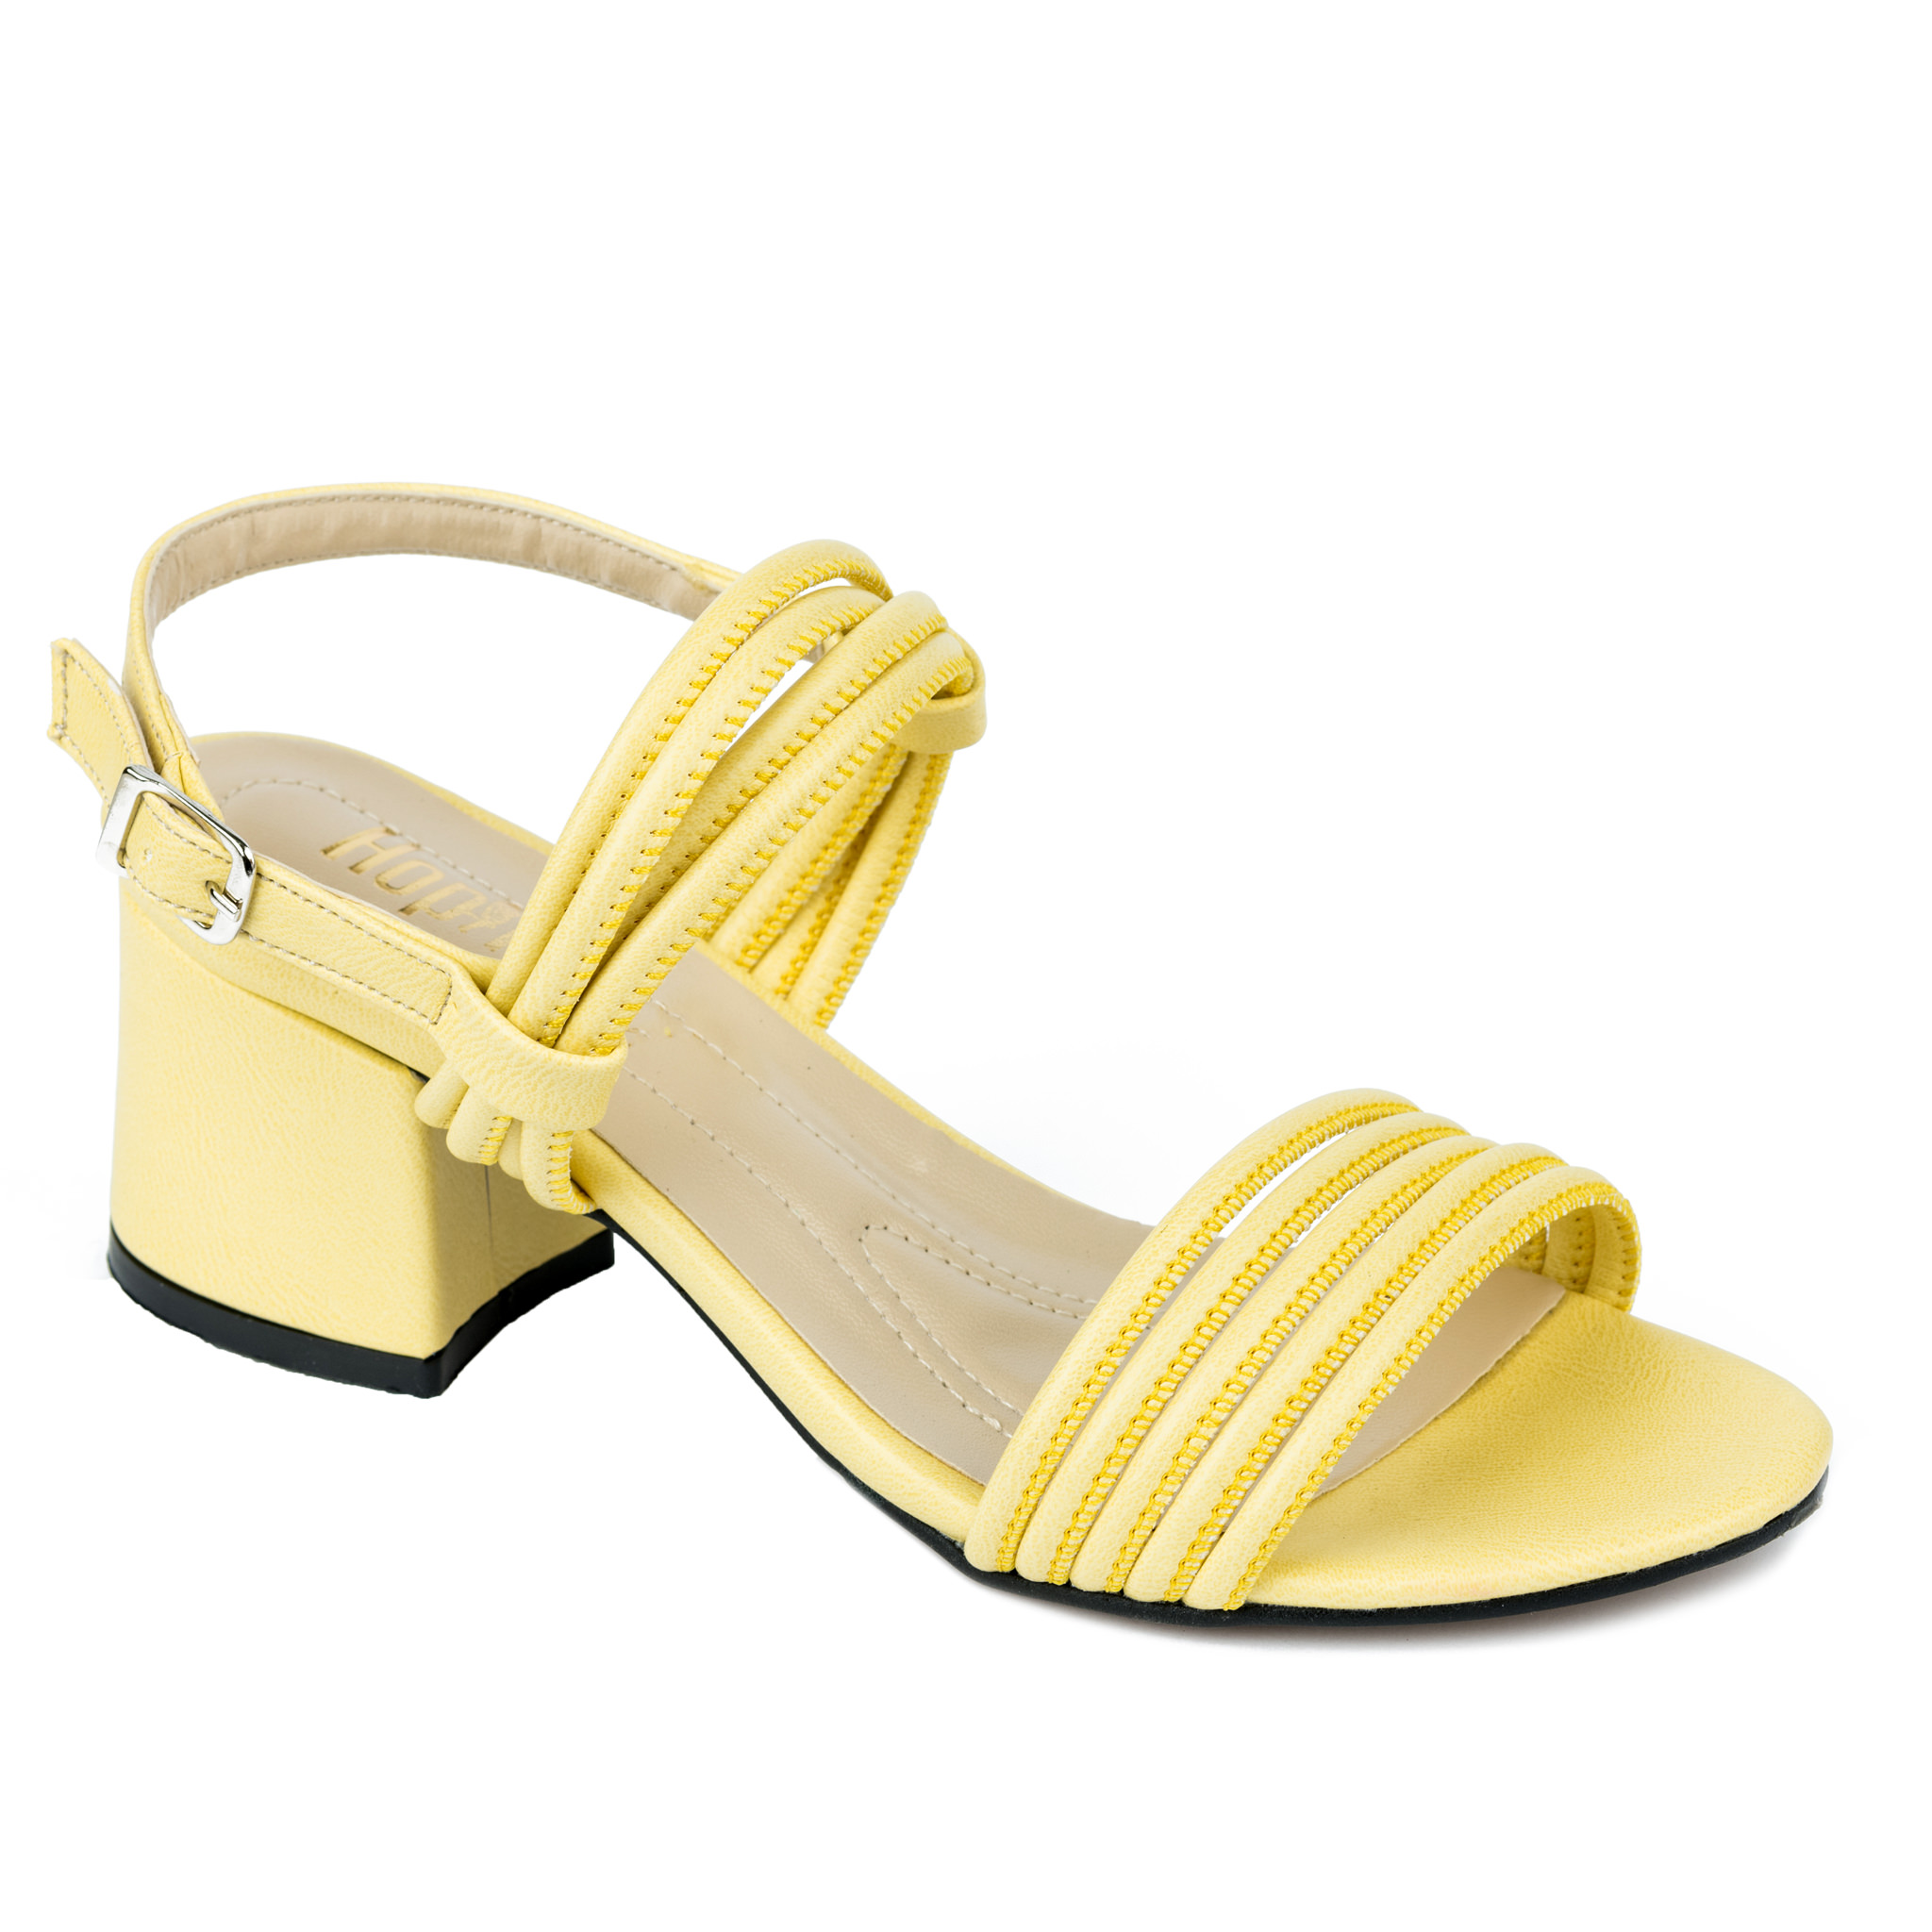 SANDALS WITH BELT AND THICK HEEL - YELLOW